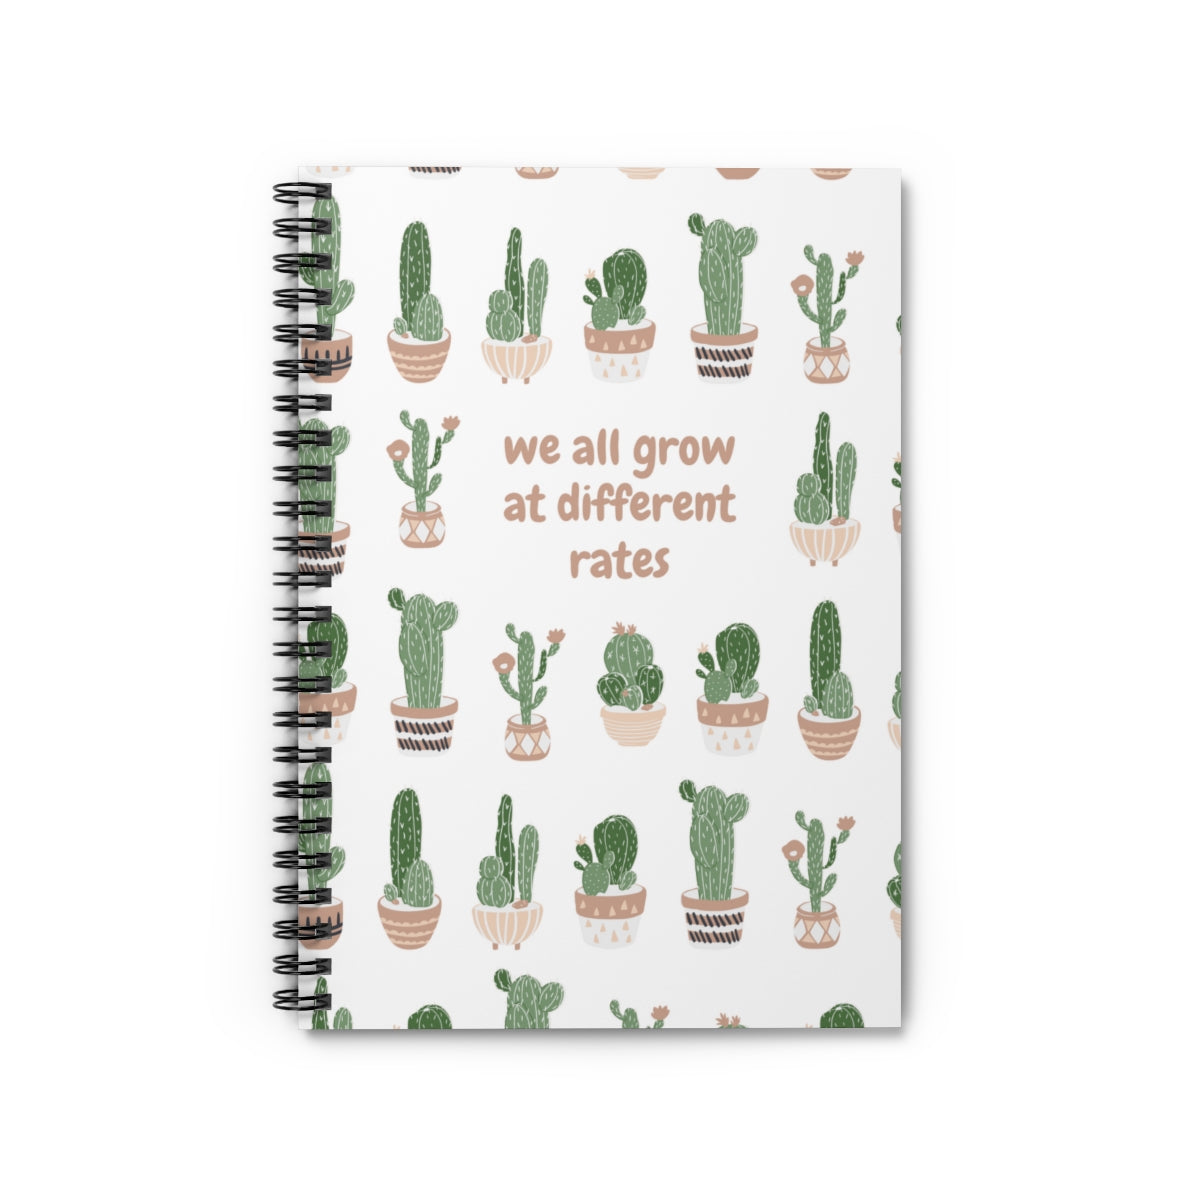 We all Grow At Different Rates Spiral Notebook - Ruled Line